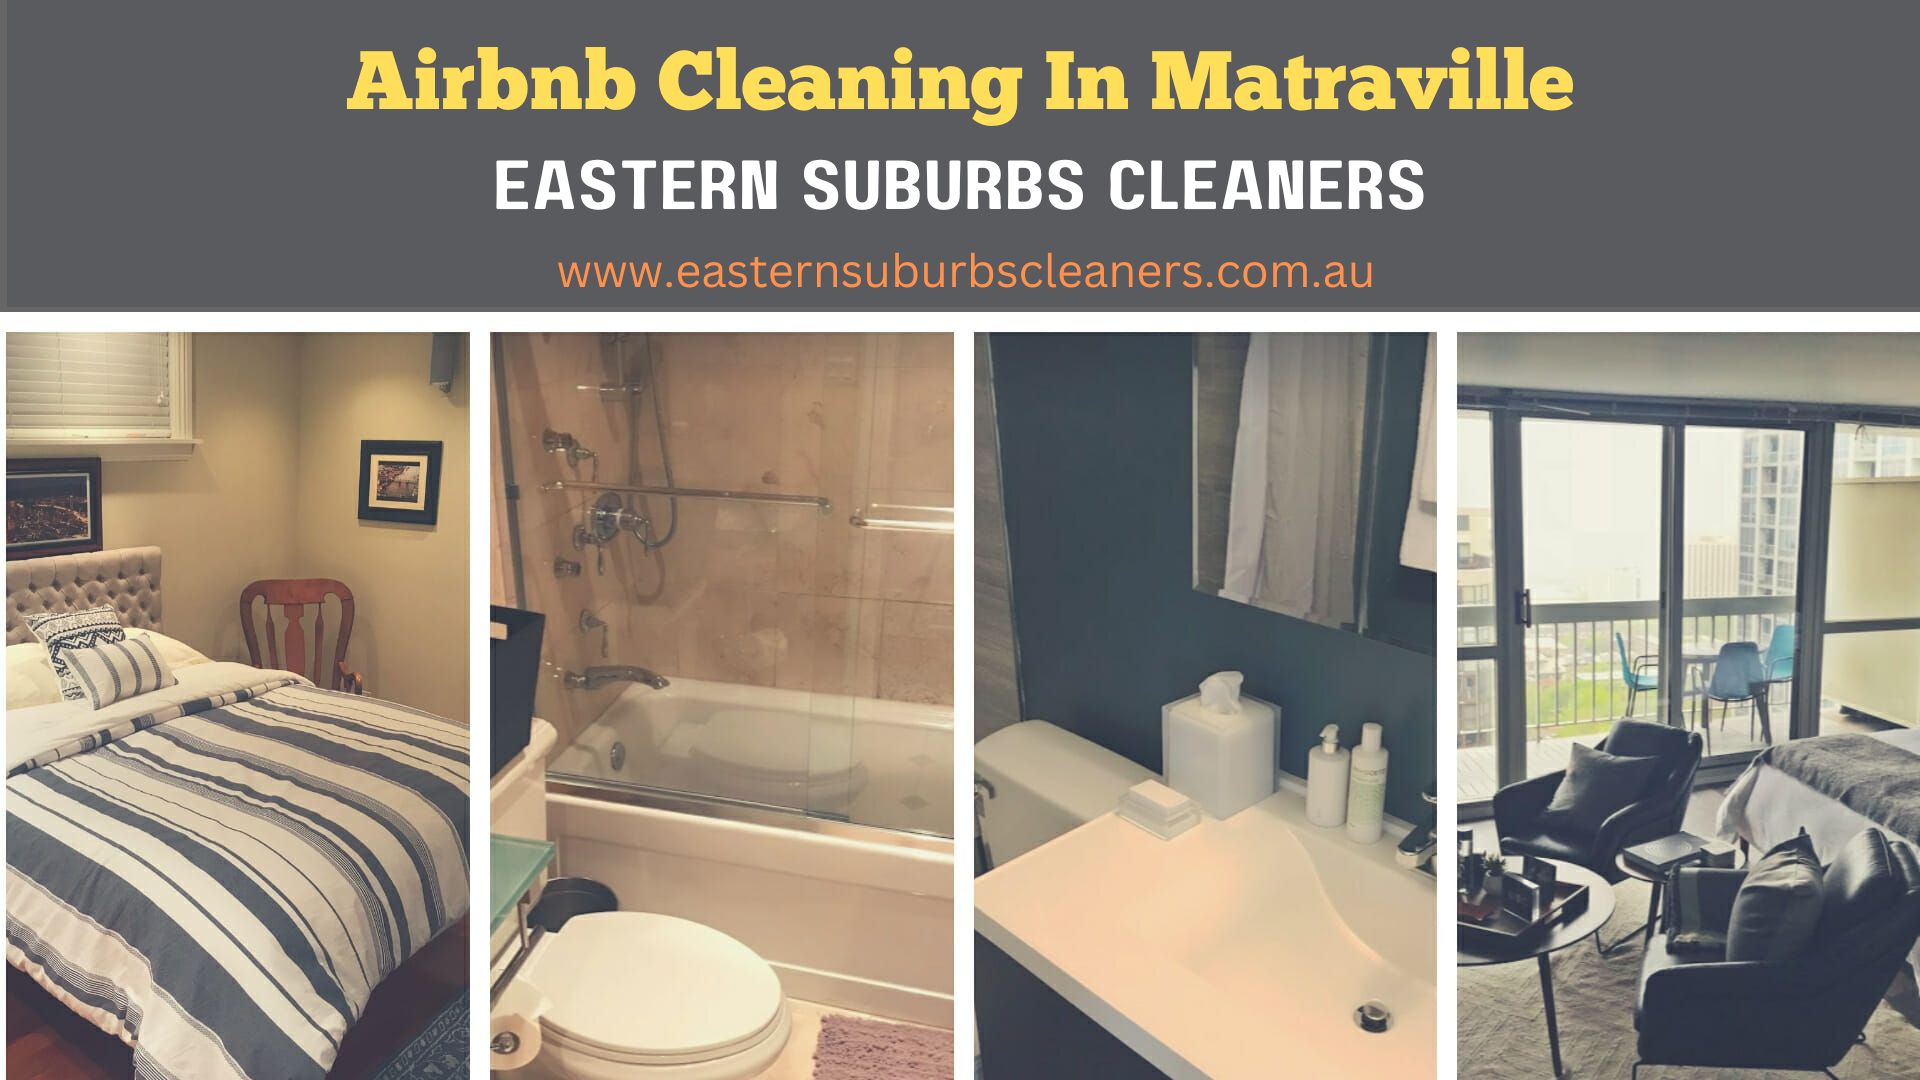 Airbnb Cleaning in Matraville